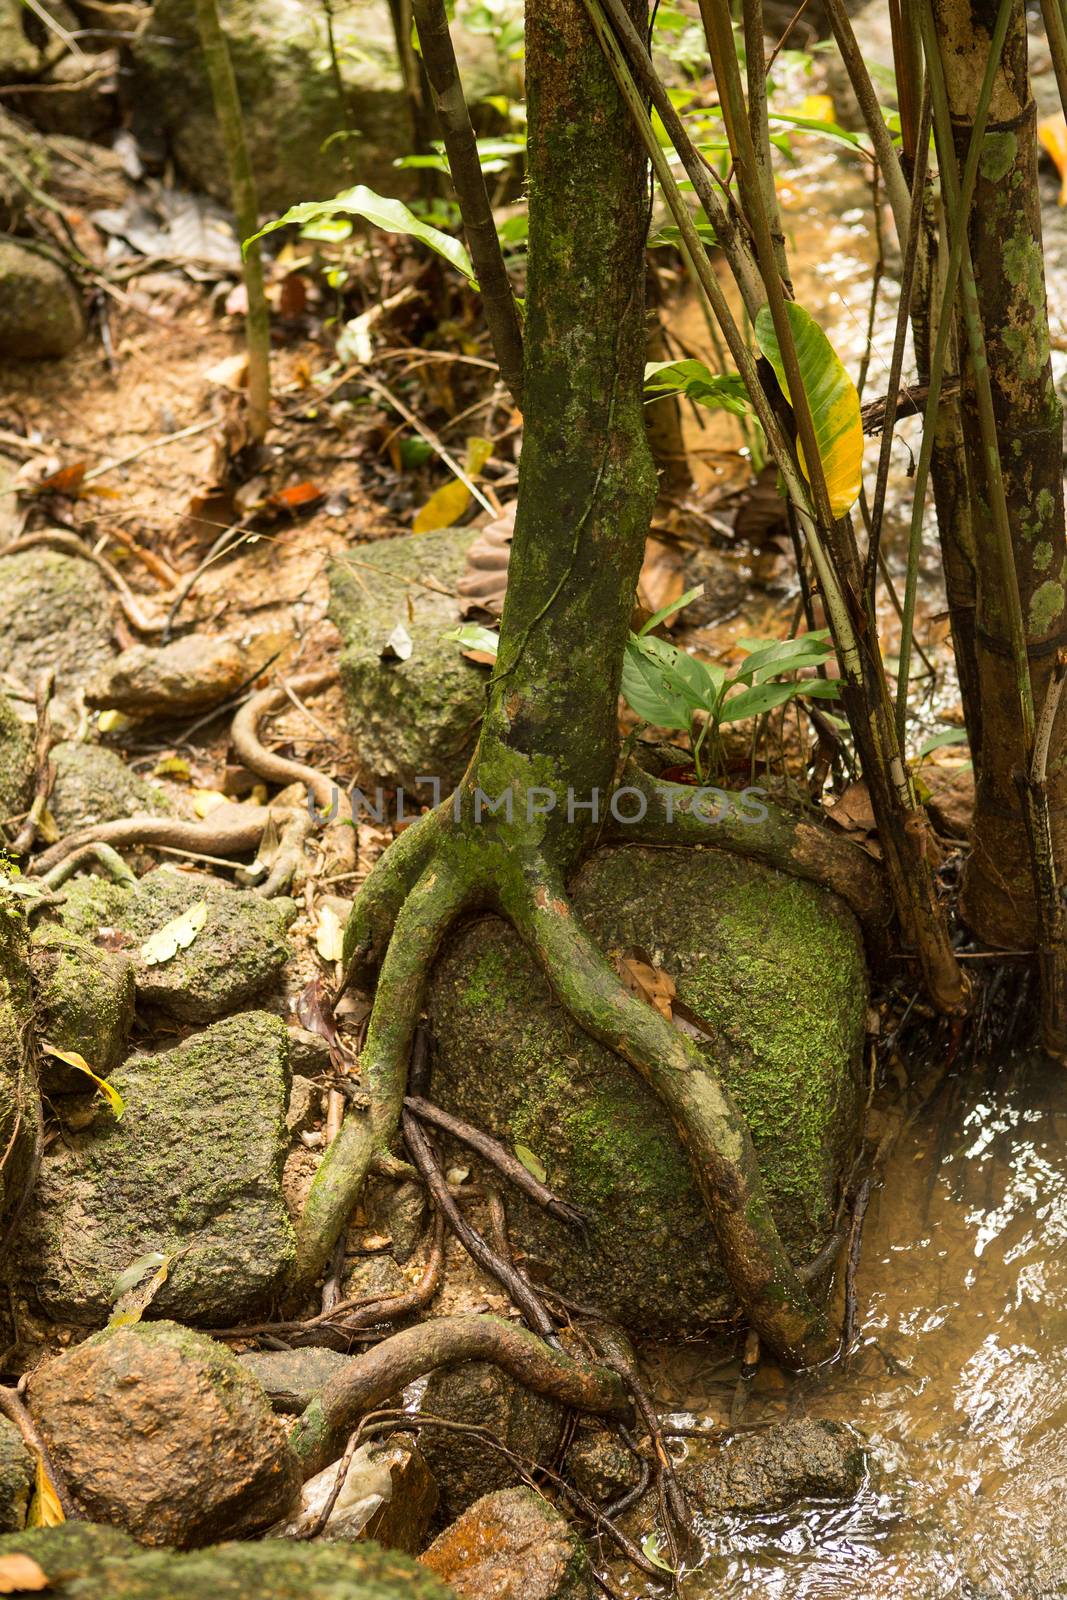 The root of a tree around the old stone in the rainforest.